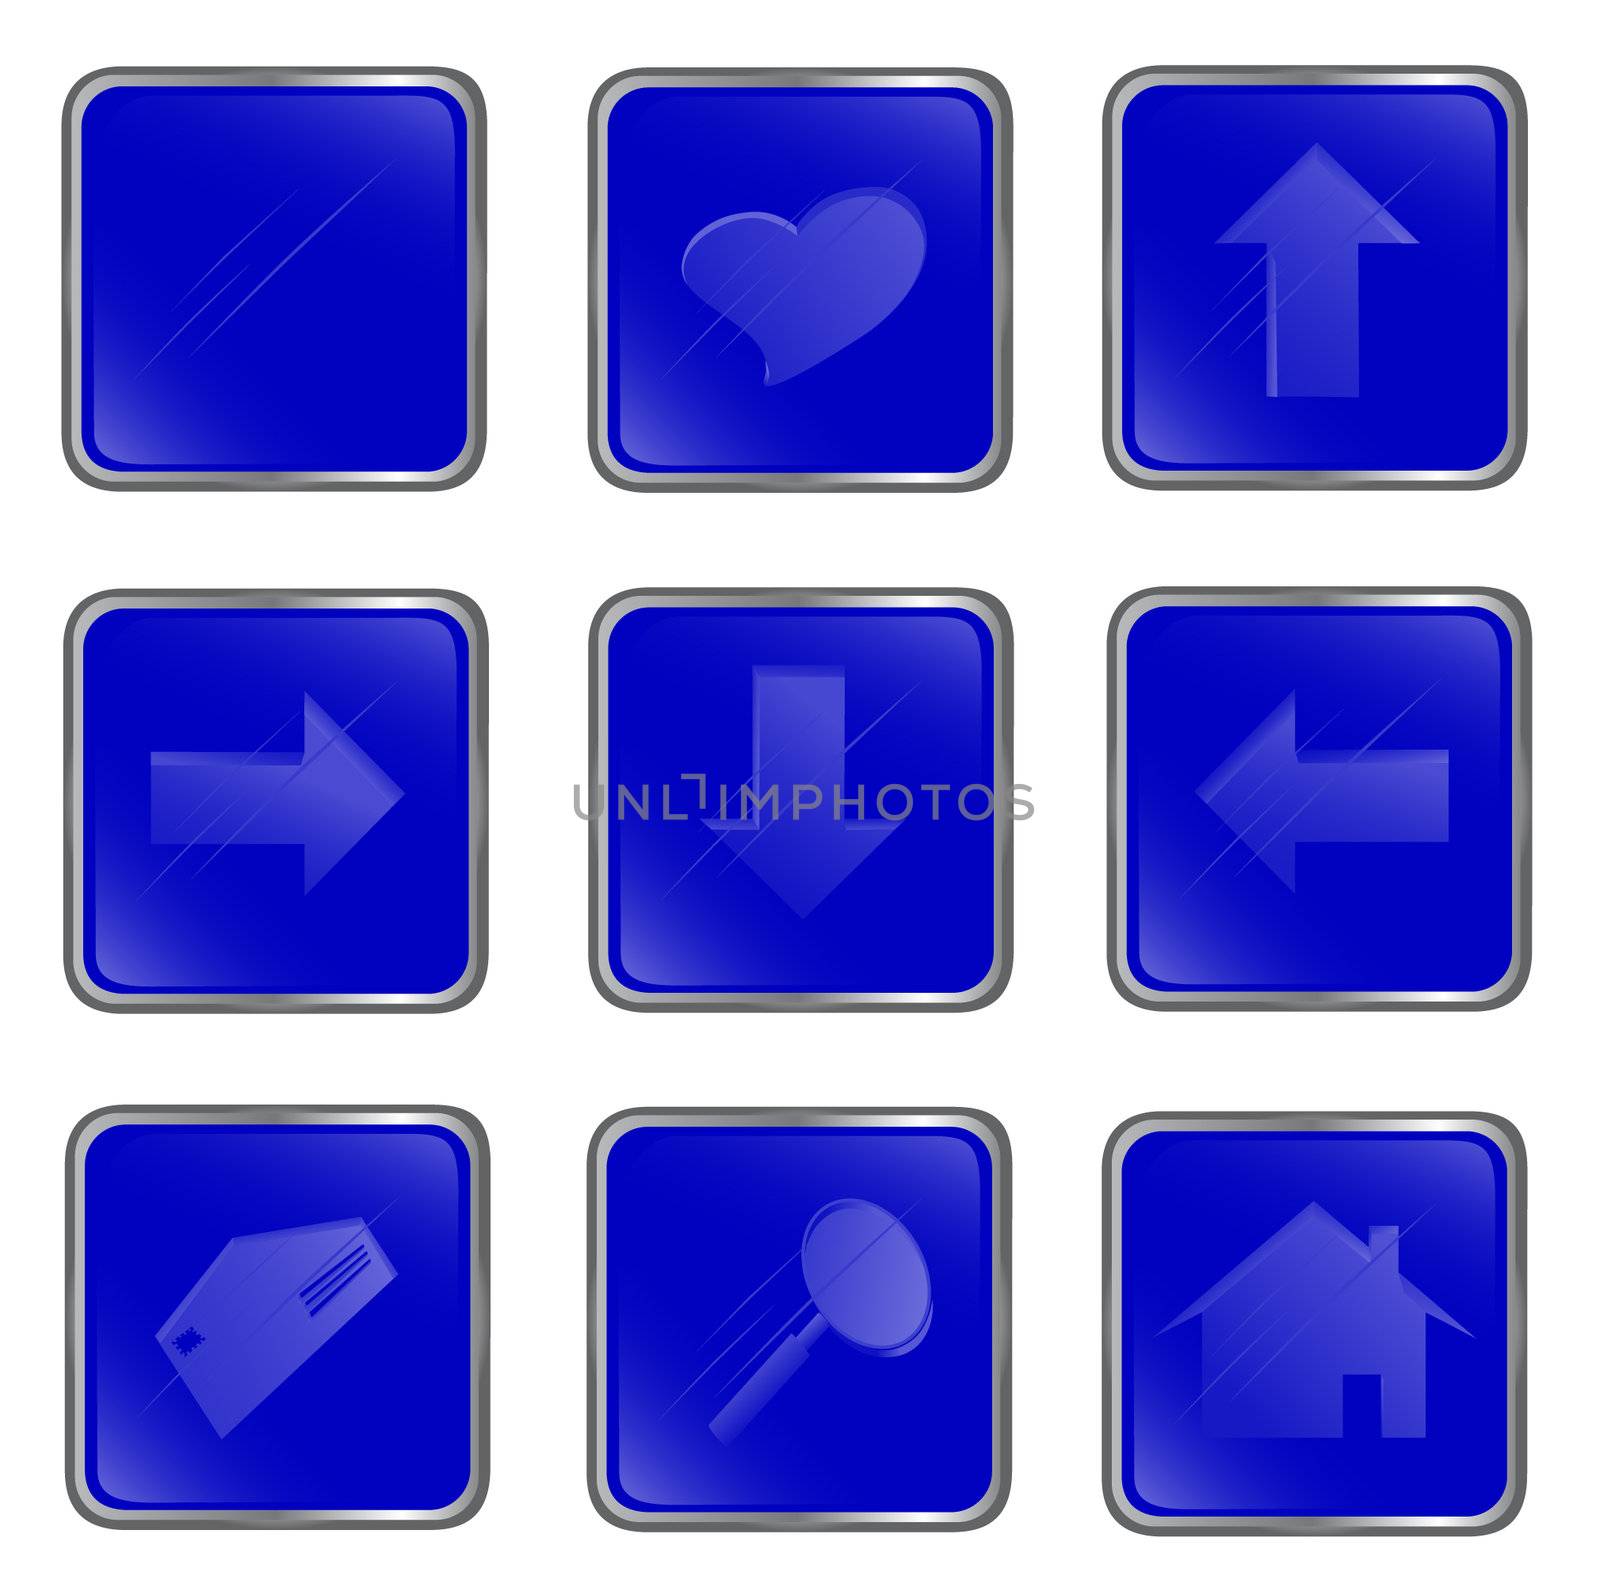 Illustration of the blue square web buttons